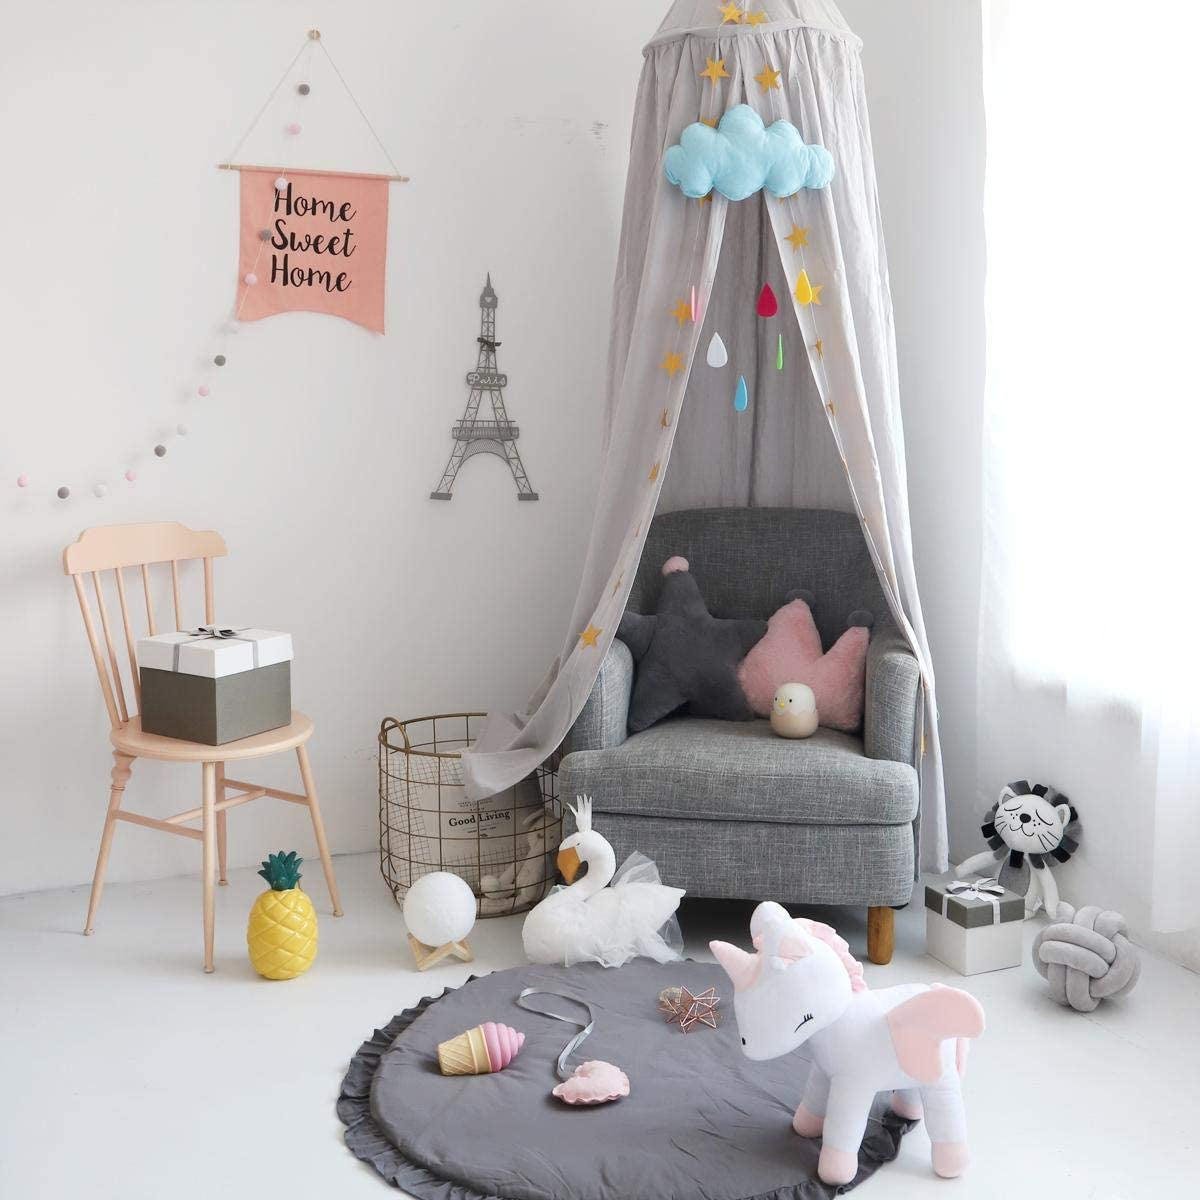 Dix-Rainbow Children Bed Canopy Grey round Dome, Nursery Room Decorations, Cotton Net Bed Canopies Kids Play Tent for Baby, Height 240Cm/94.5In